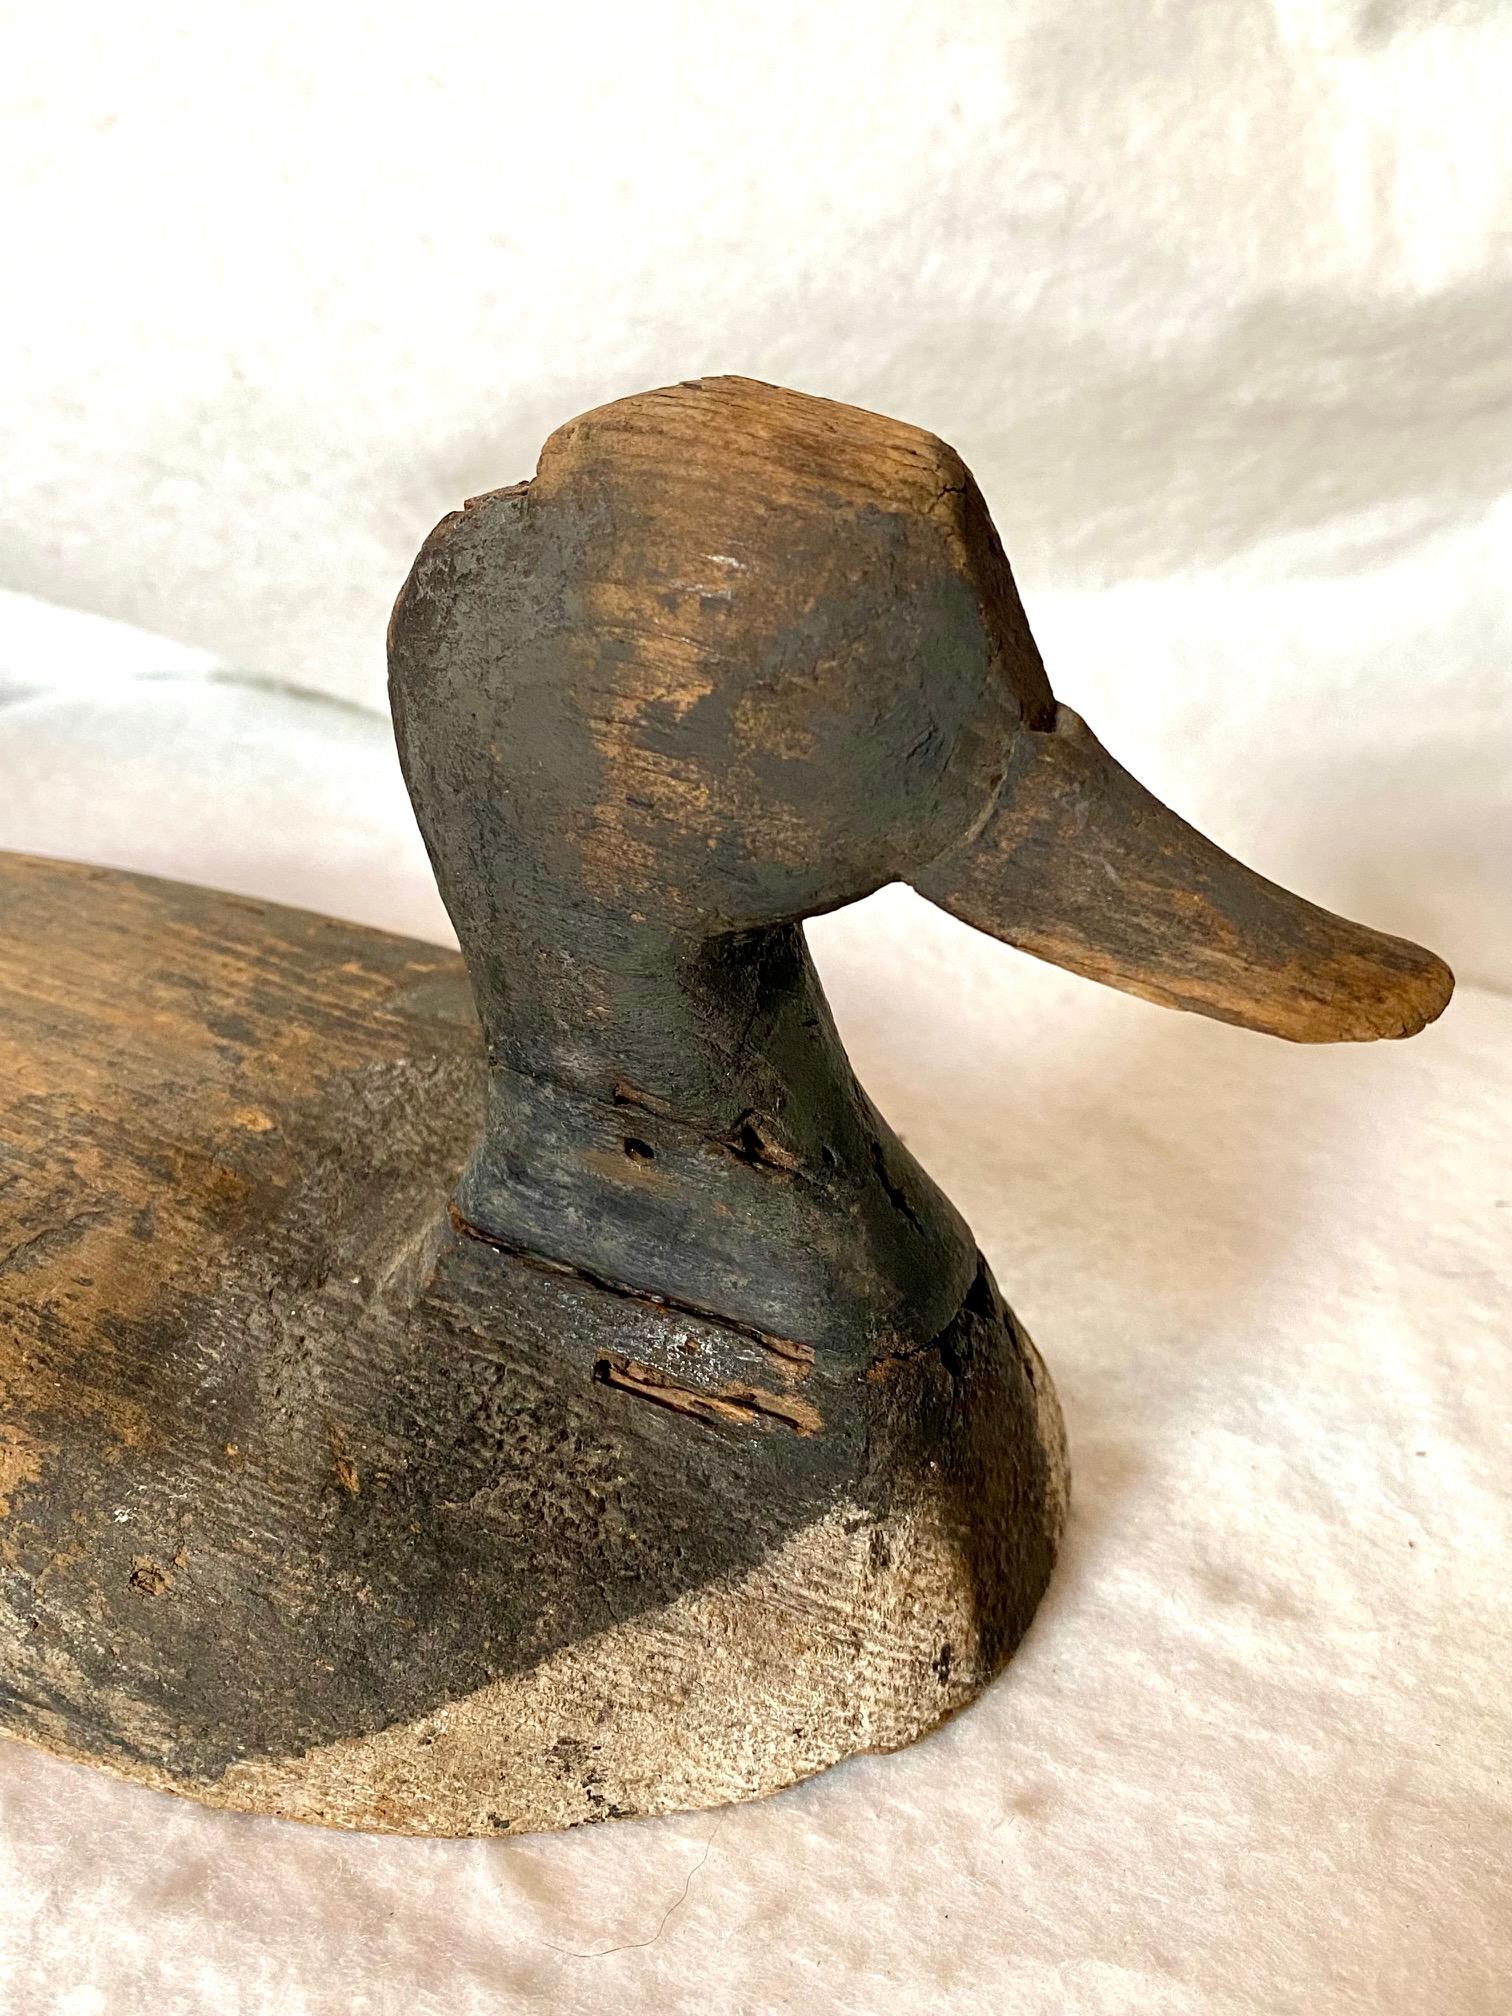 Early Chesapeake Bay Scaup Drake sink box wing decoy, possibly by Ira Hudson or family, circa 1910, a very shallow flat bodied decoy with black head, carved black bill, and black and white body. The decoy is in decent condition and very well shows